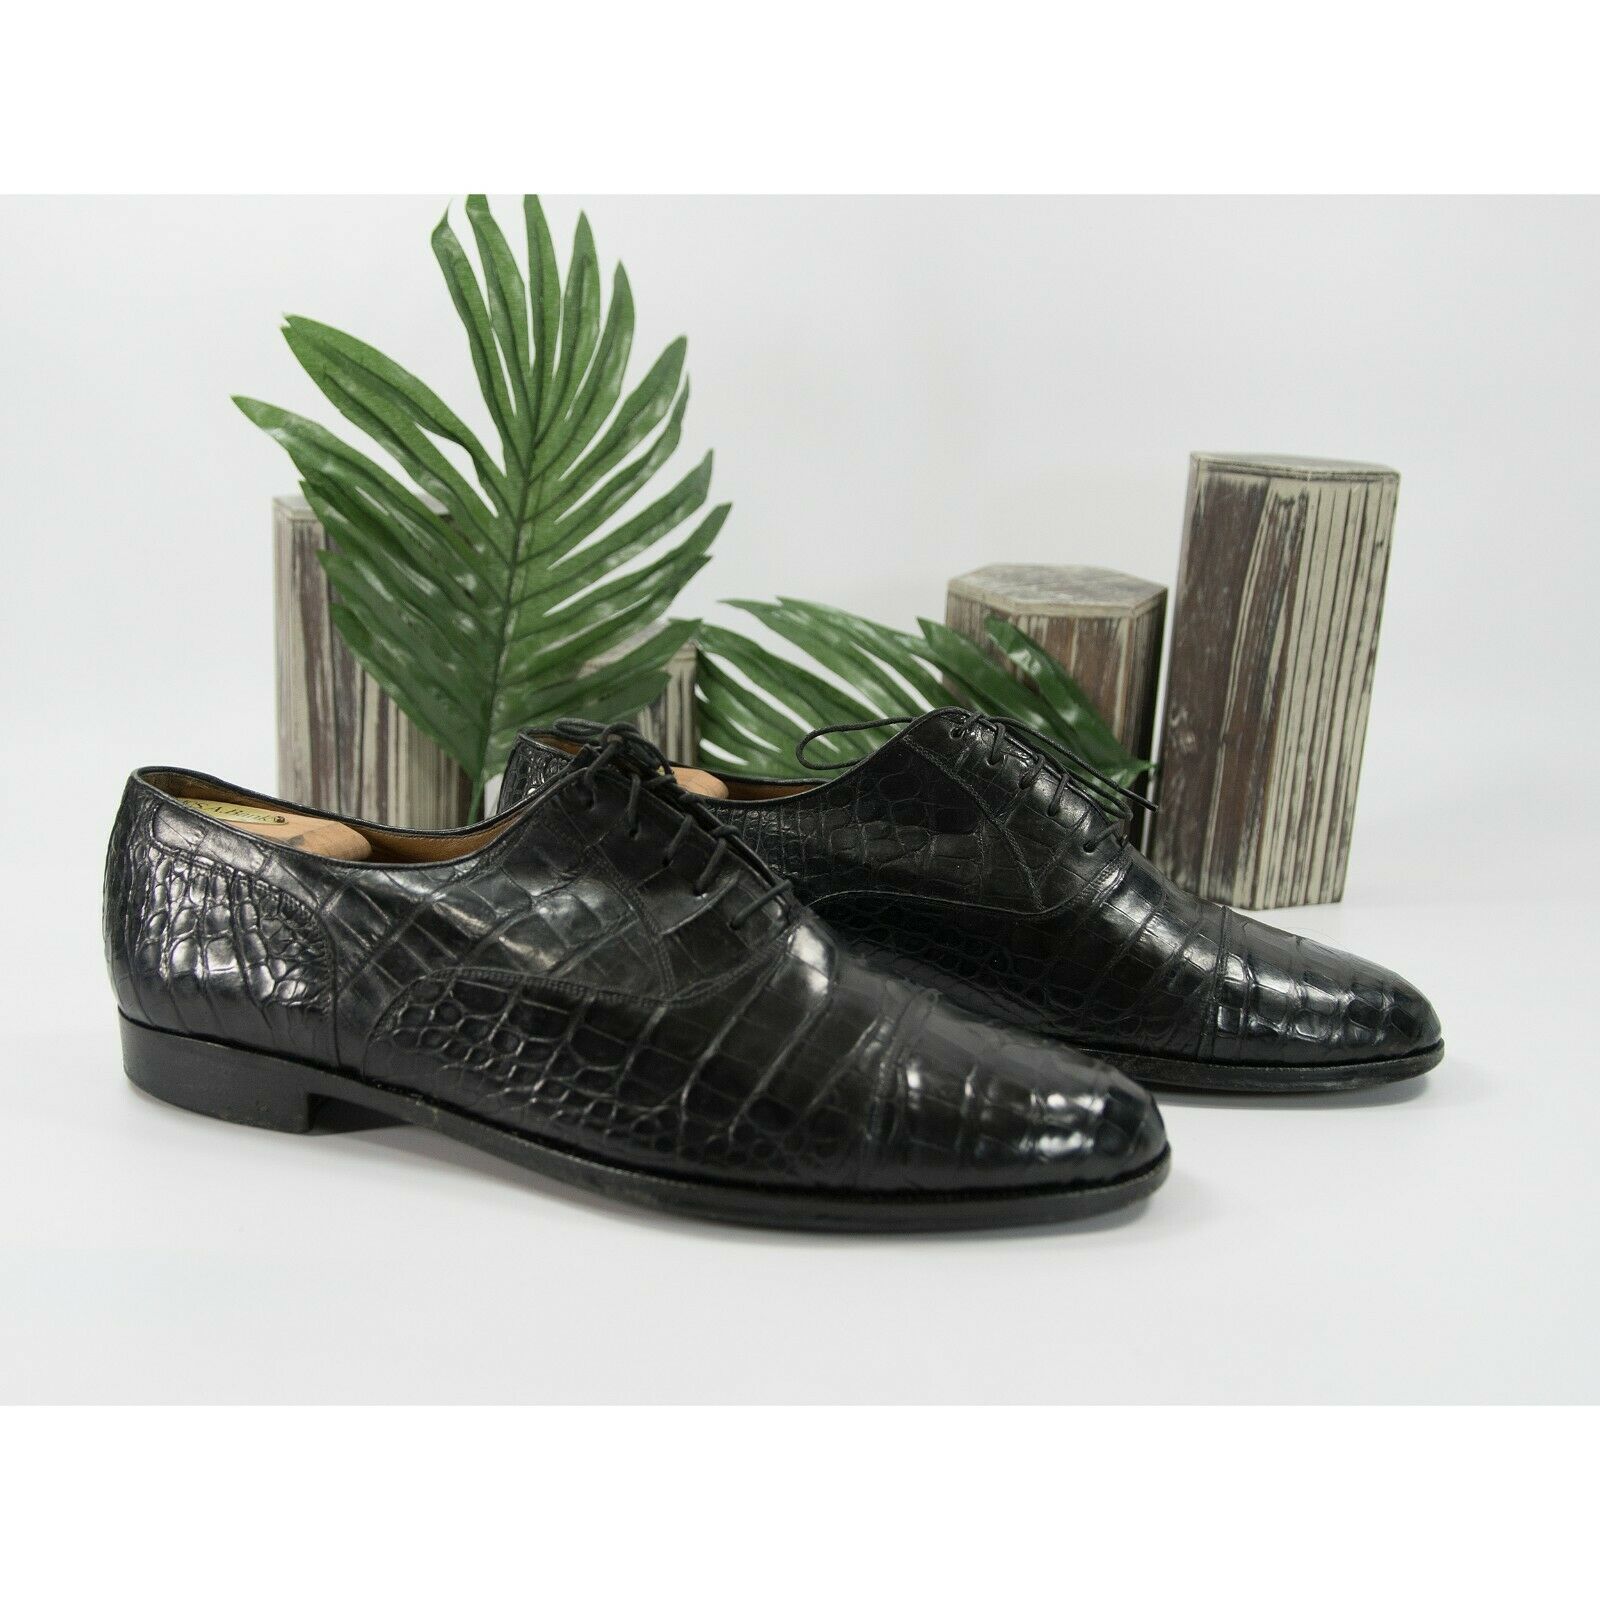 Primary image for Davanzati Black Croc Leather Lace Up Oxford Loafer Shoes Size 13